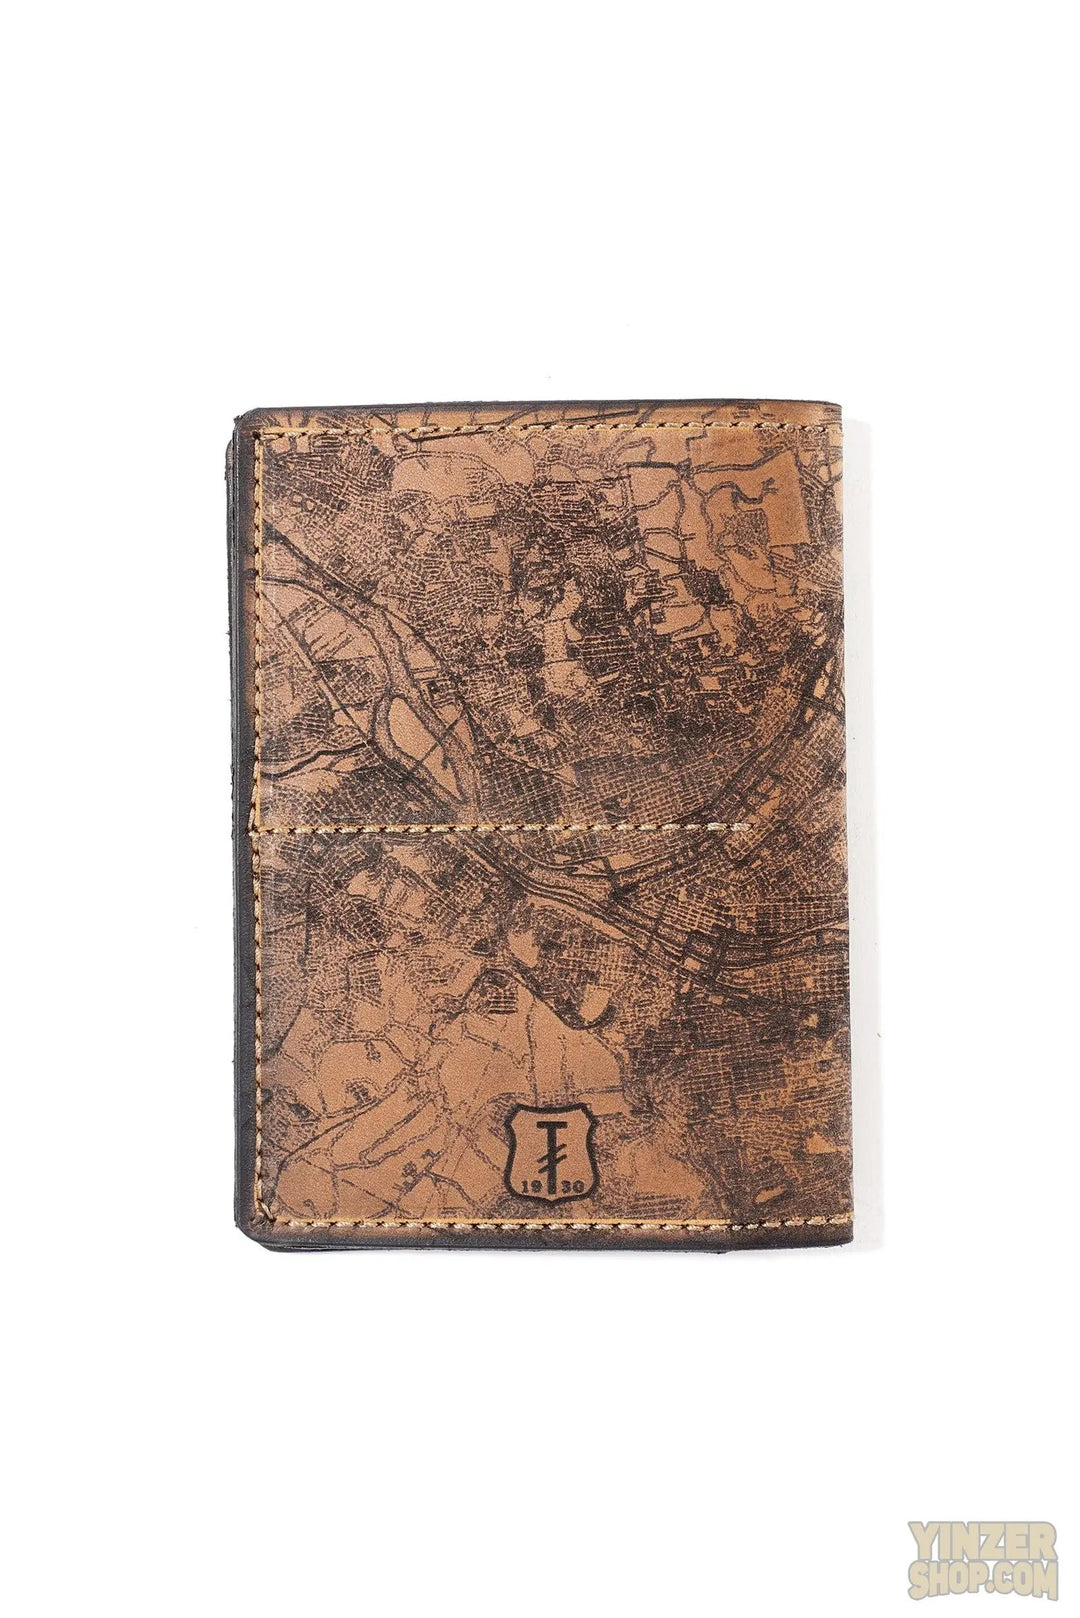 Handmade Leather Etched Pittsburgh Map Passport Wallet  Tactilecraftworks.com   